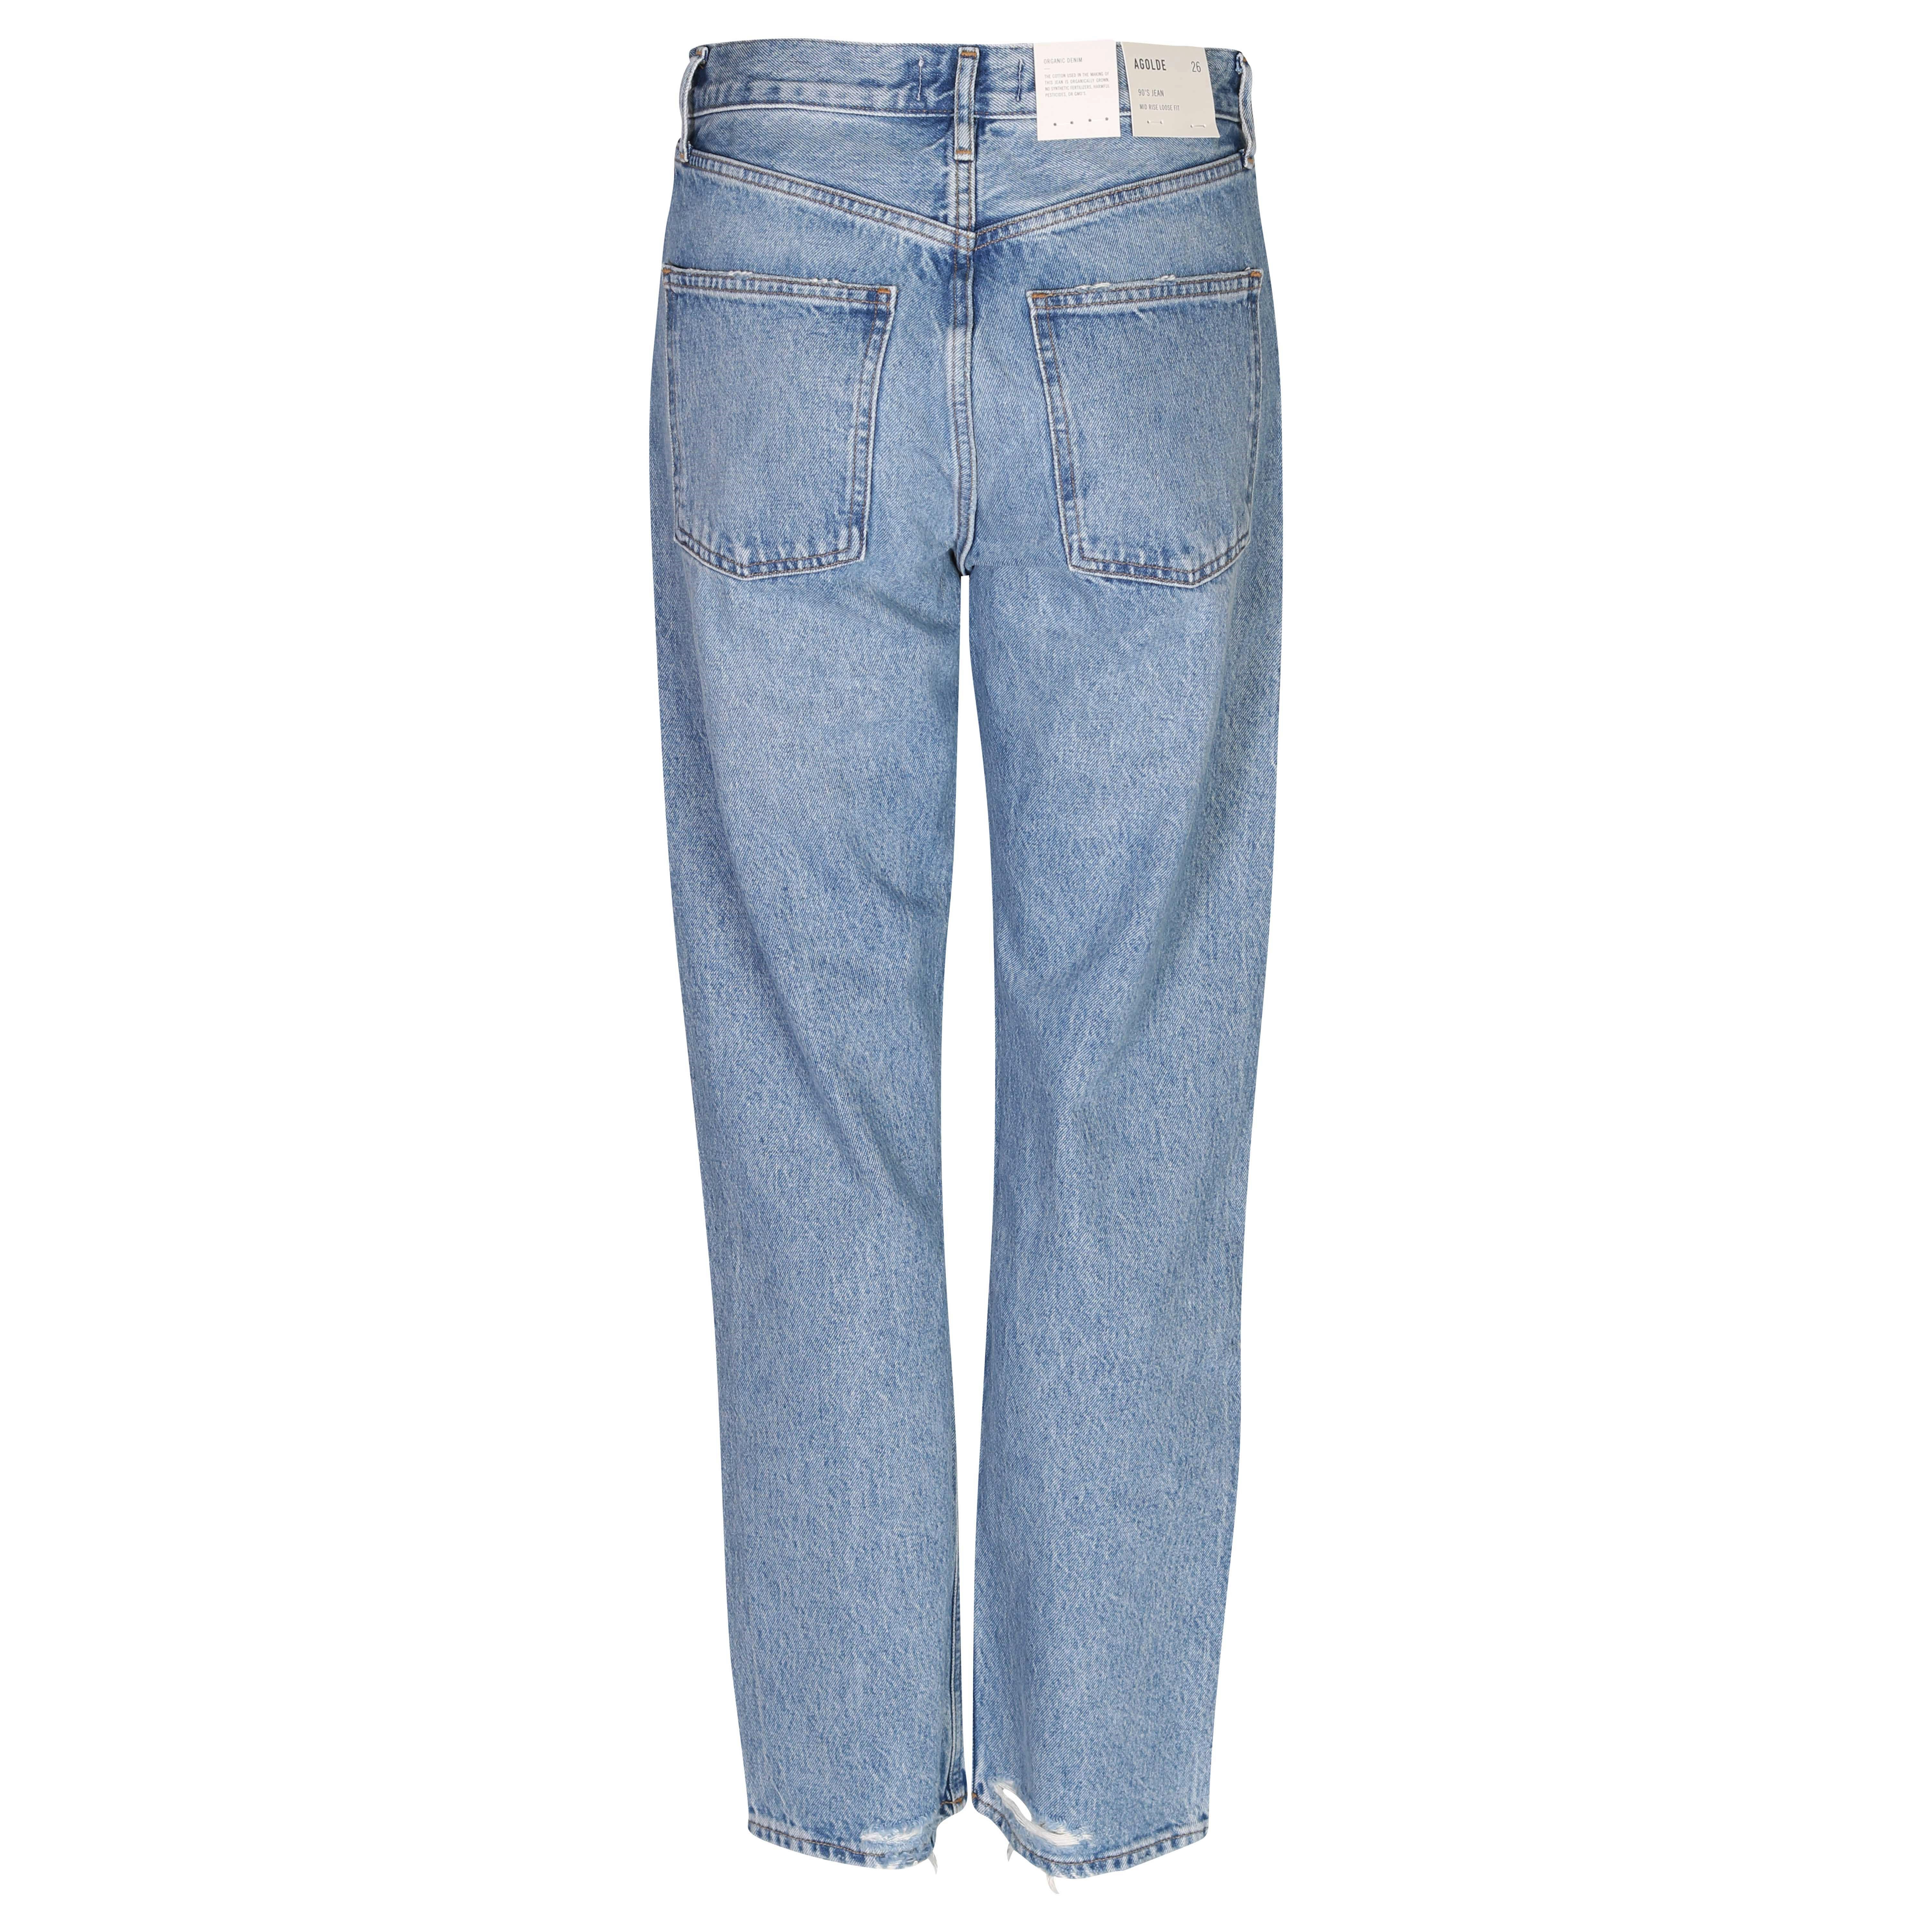 Agolde Jeans 90s Cropped in Scheme Washing W 29